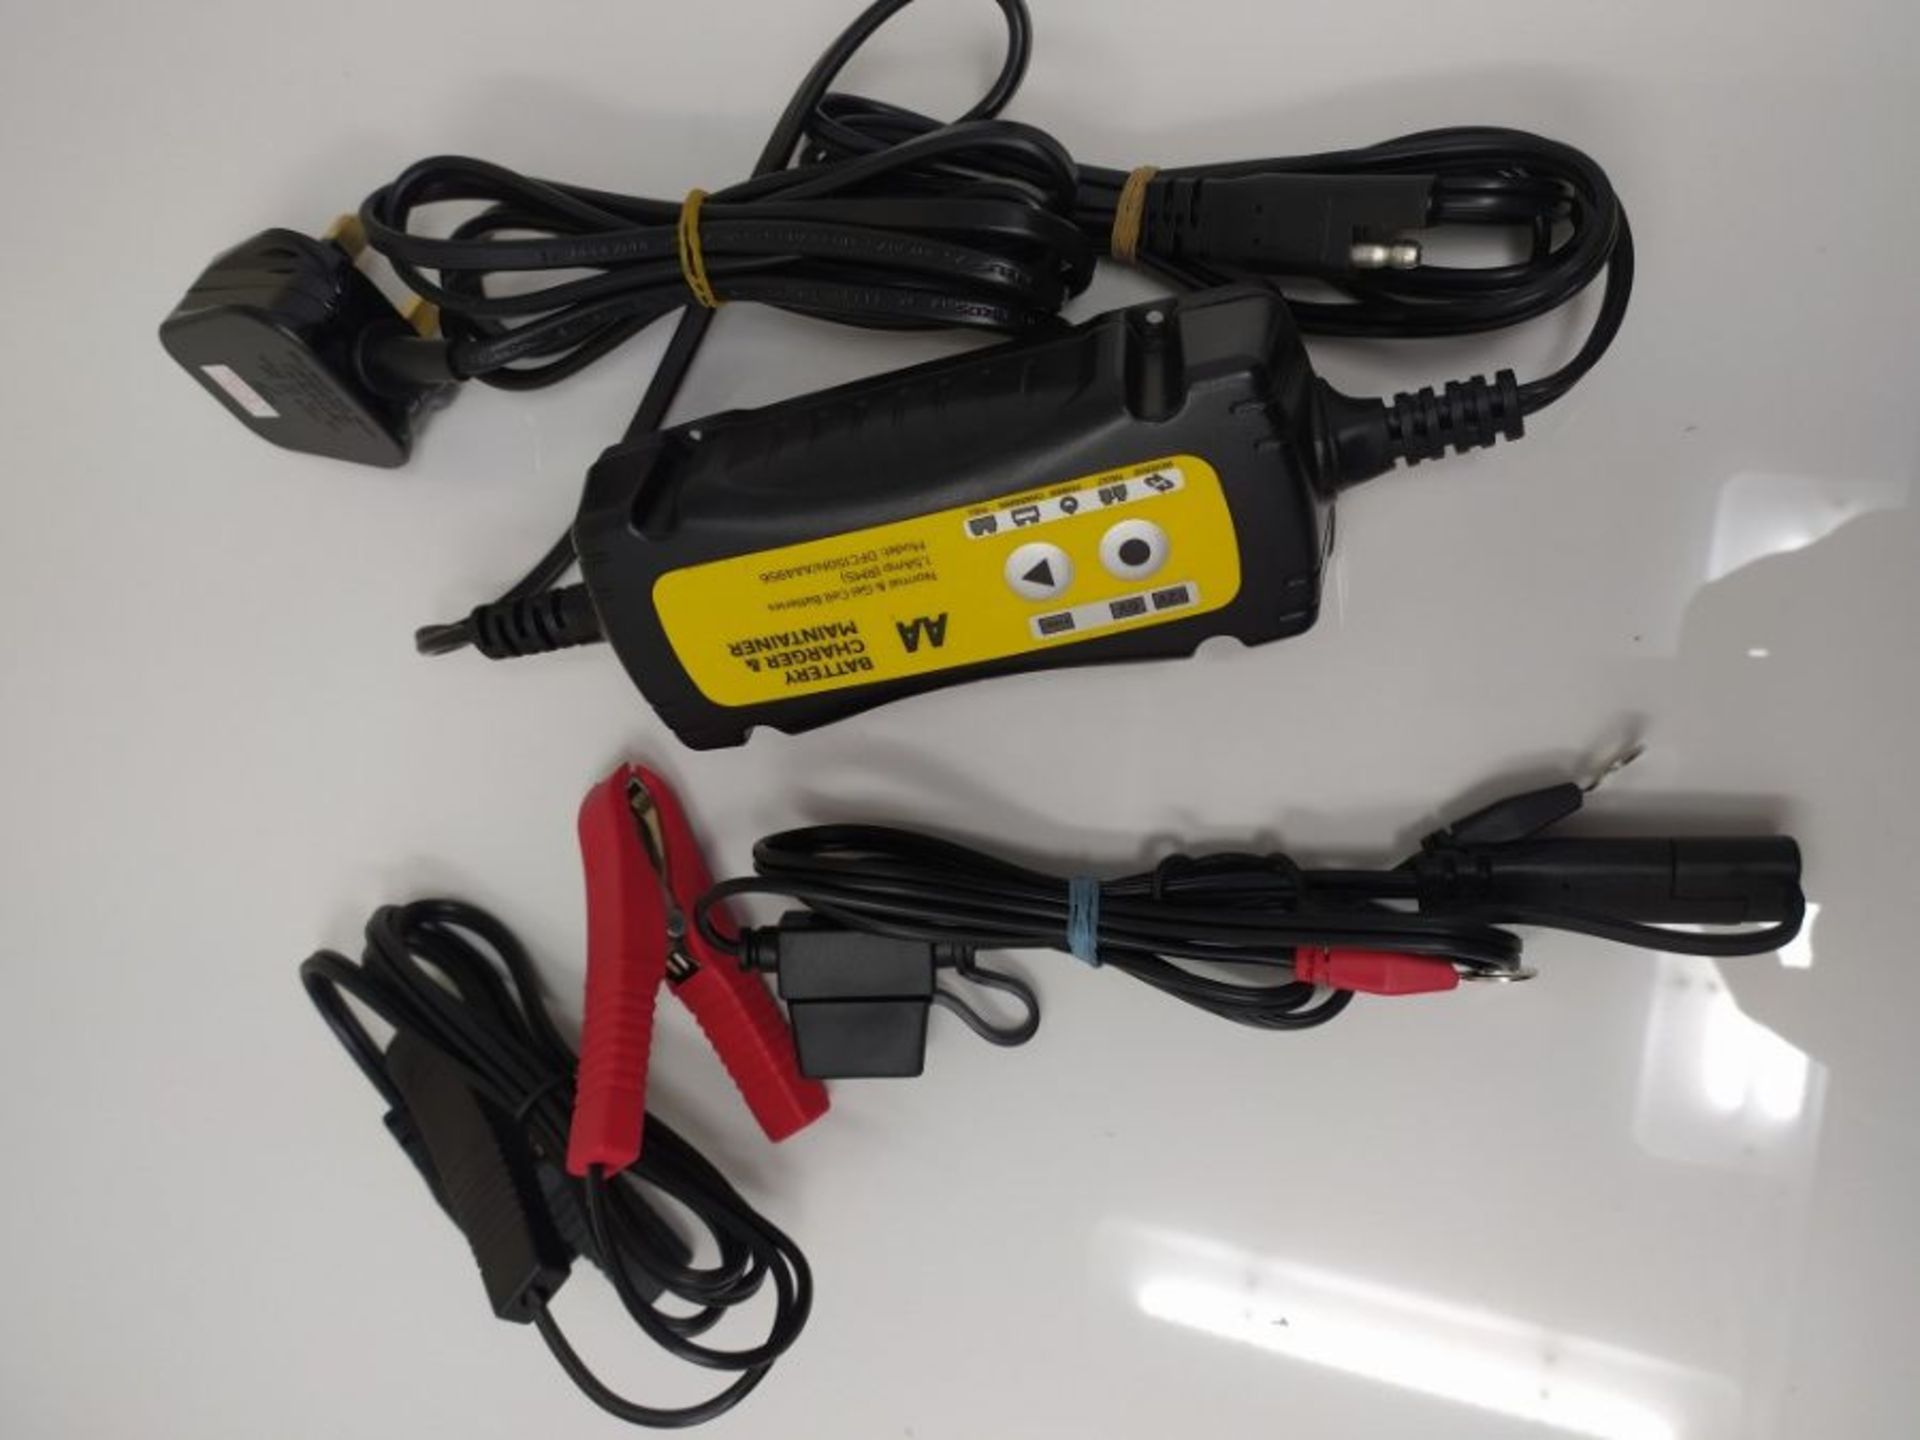 AA 1.5 Amp 6 V/12 V Car Battery Charger Maintainer AA4956 UK Plug Fully Automatic with - Image 2 of 2